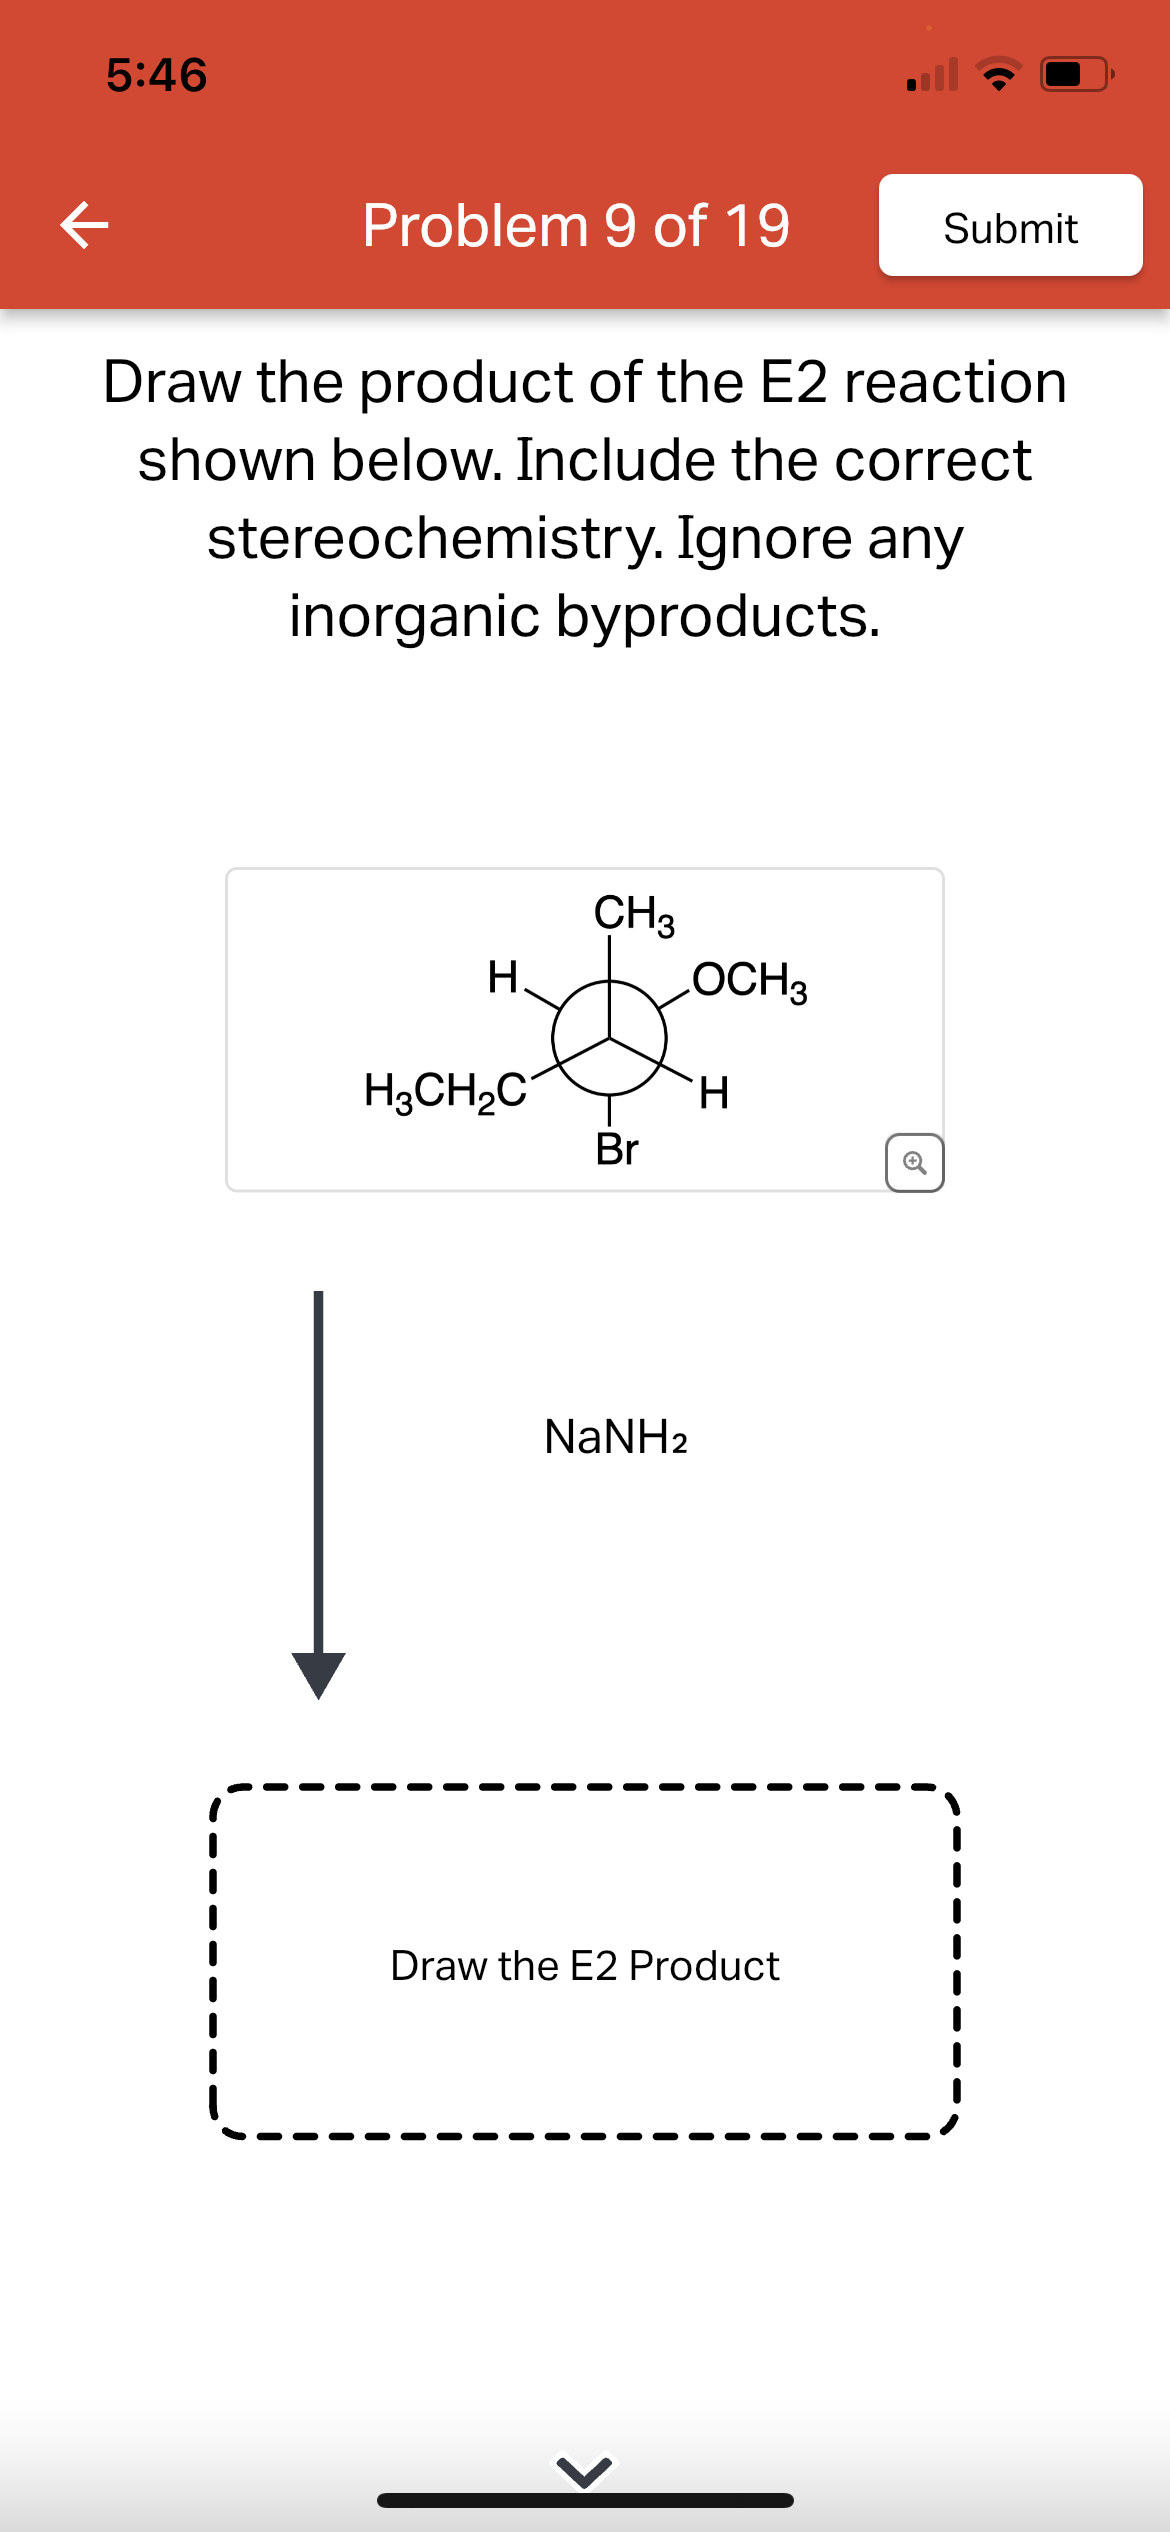 K
5:46
Problem 9 of 19
Draw the product of the E2 reaction
shown below. Include the correct
stereochemistry. Ignore any
inorganic byproducts.
H
H3CH₂C
CH3
Br
LOCH 3
NaNH2
Submit
H
Draw the E2 Product